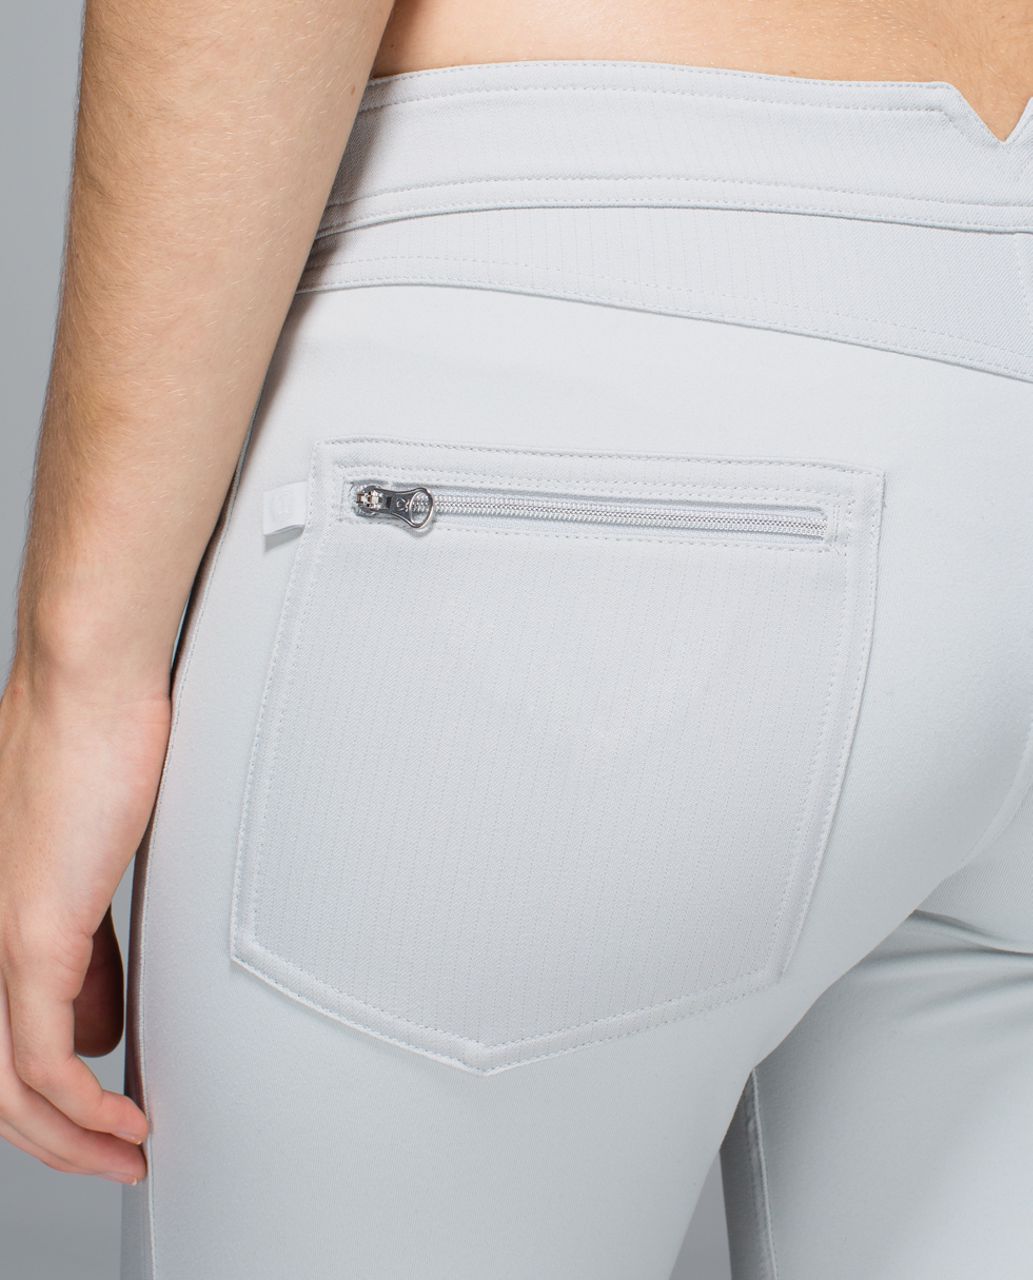 Lululemon Better Together Pant - Silver Spoon